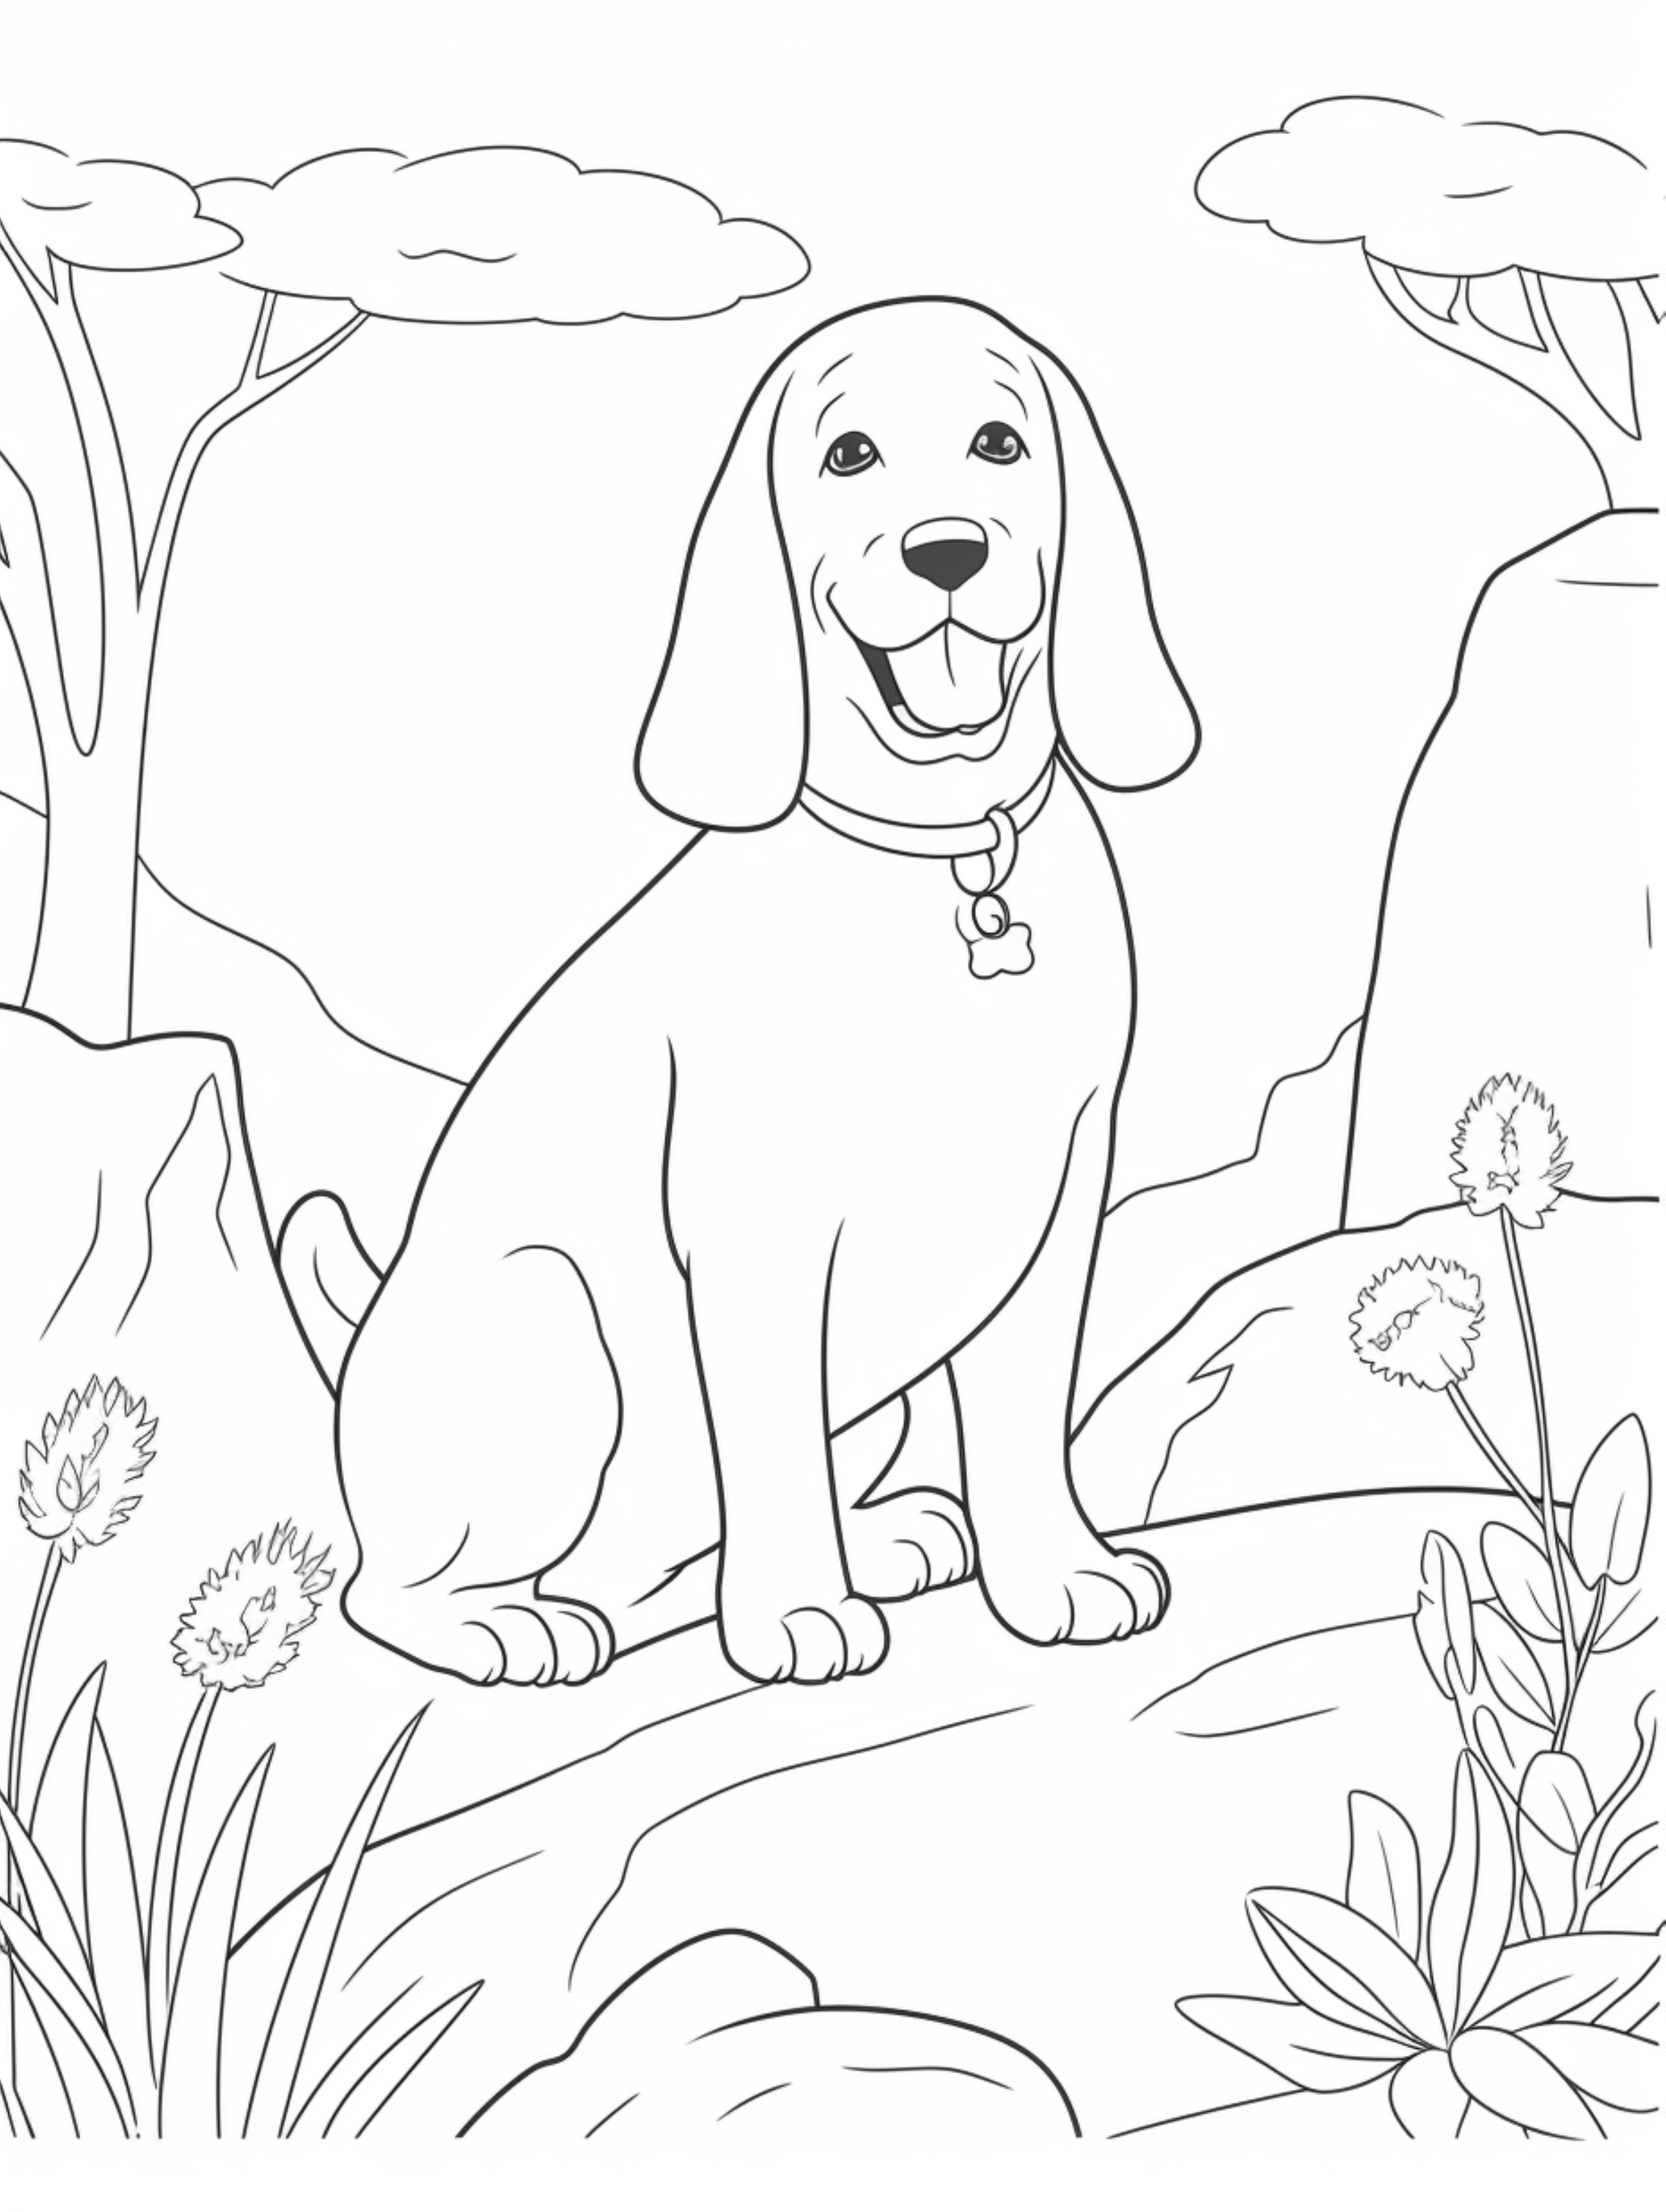 basset hound coloring page